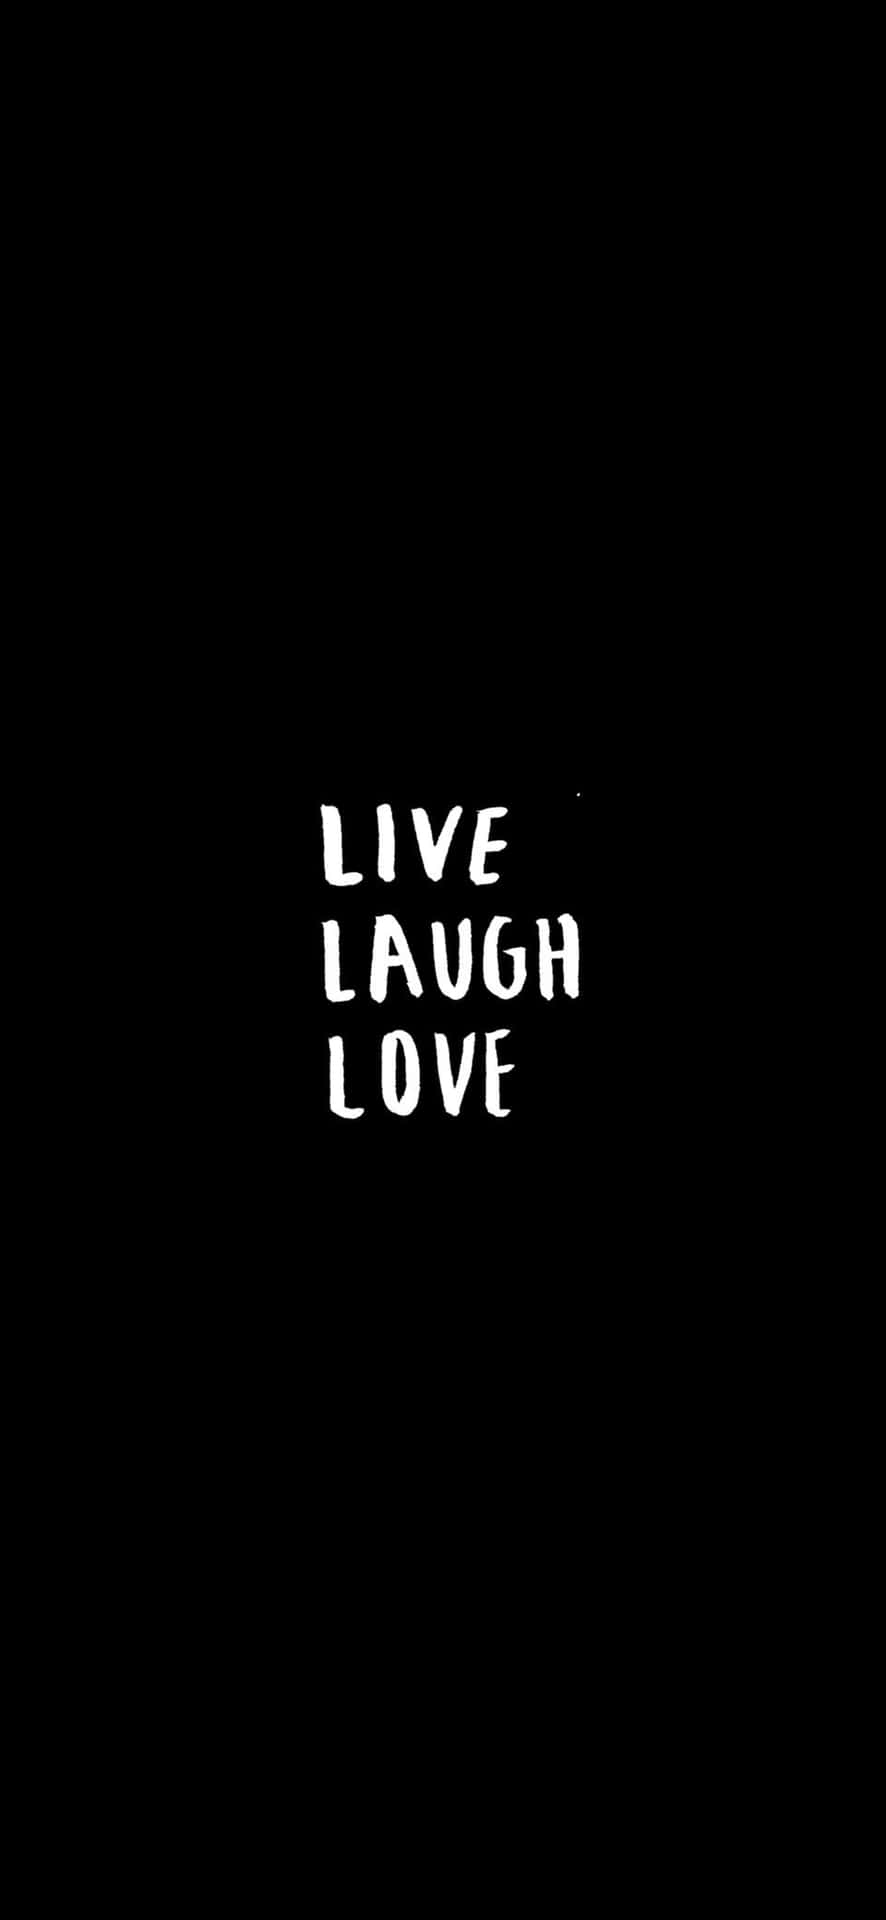 Share 87+ live love laugh wallpaper best - in.cdgdbentre